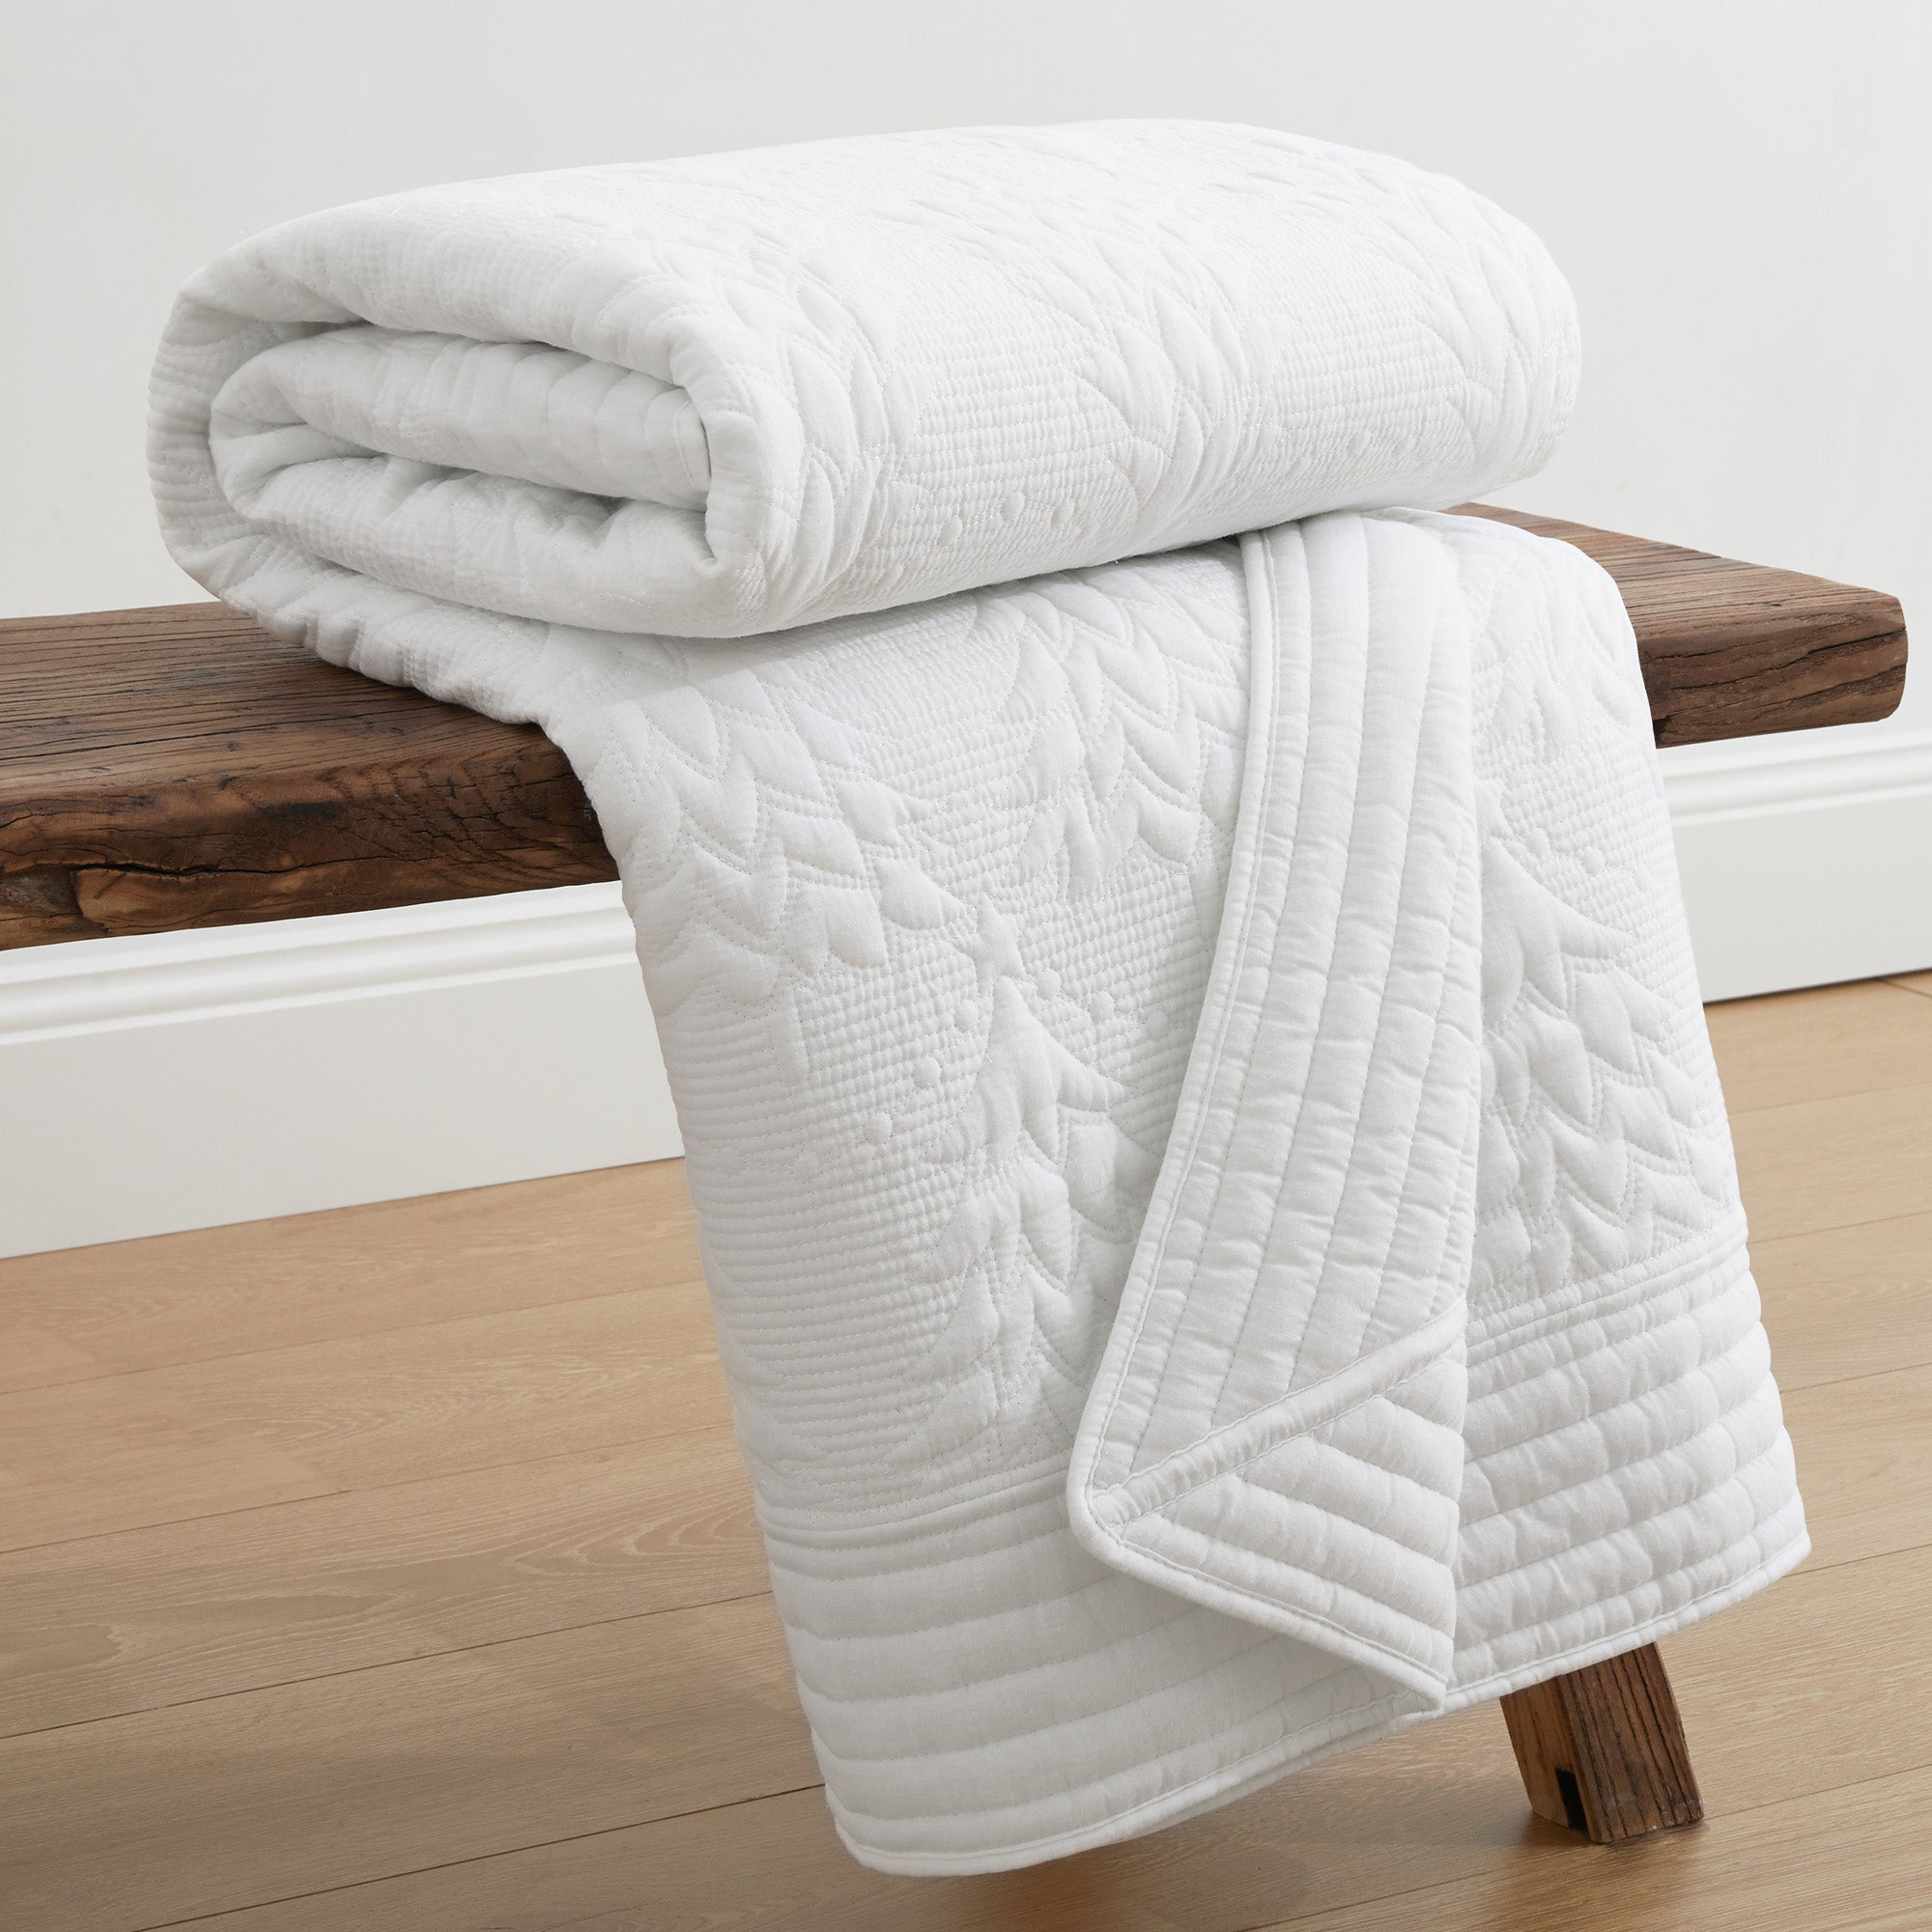 O Christmas Tree White Quilted Throw, 59% OFF